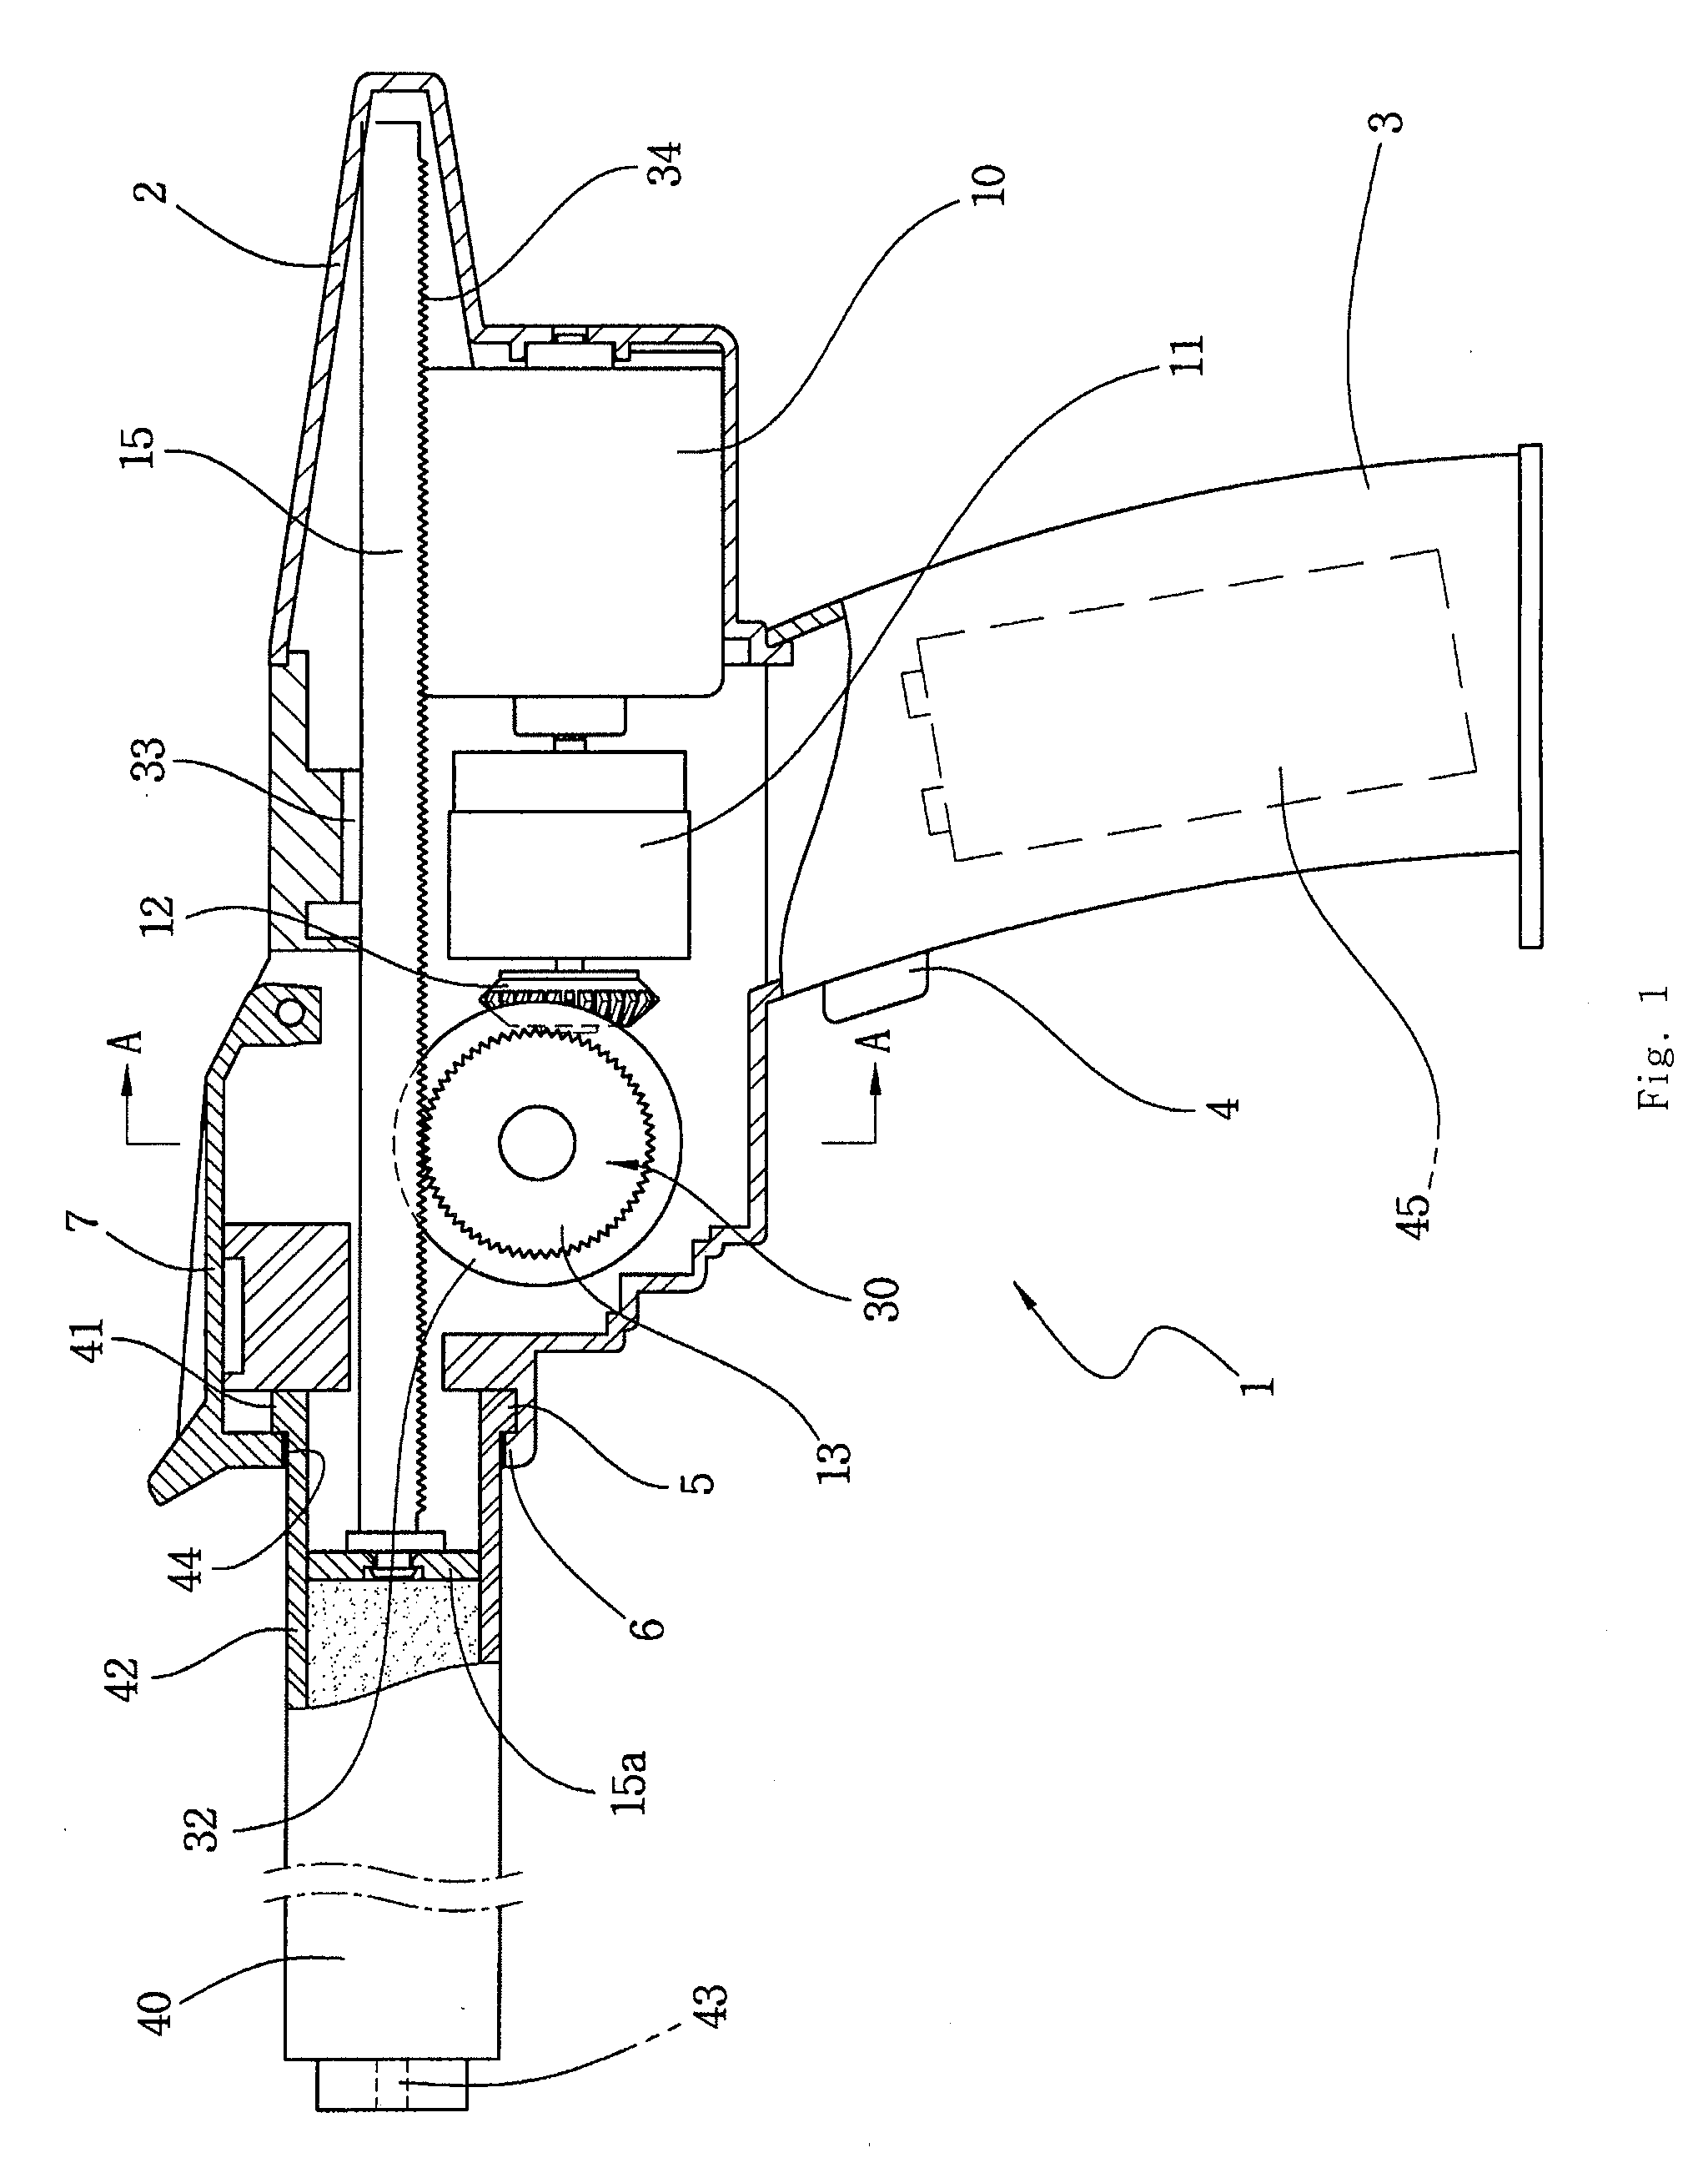 Squeezing gun for two-part medical viscous fluid